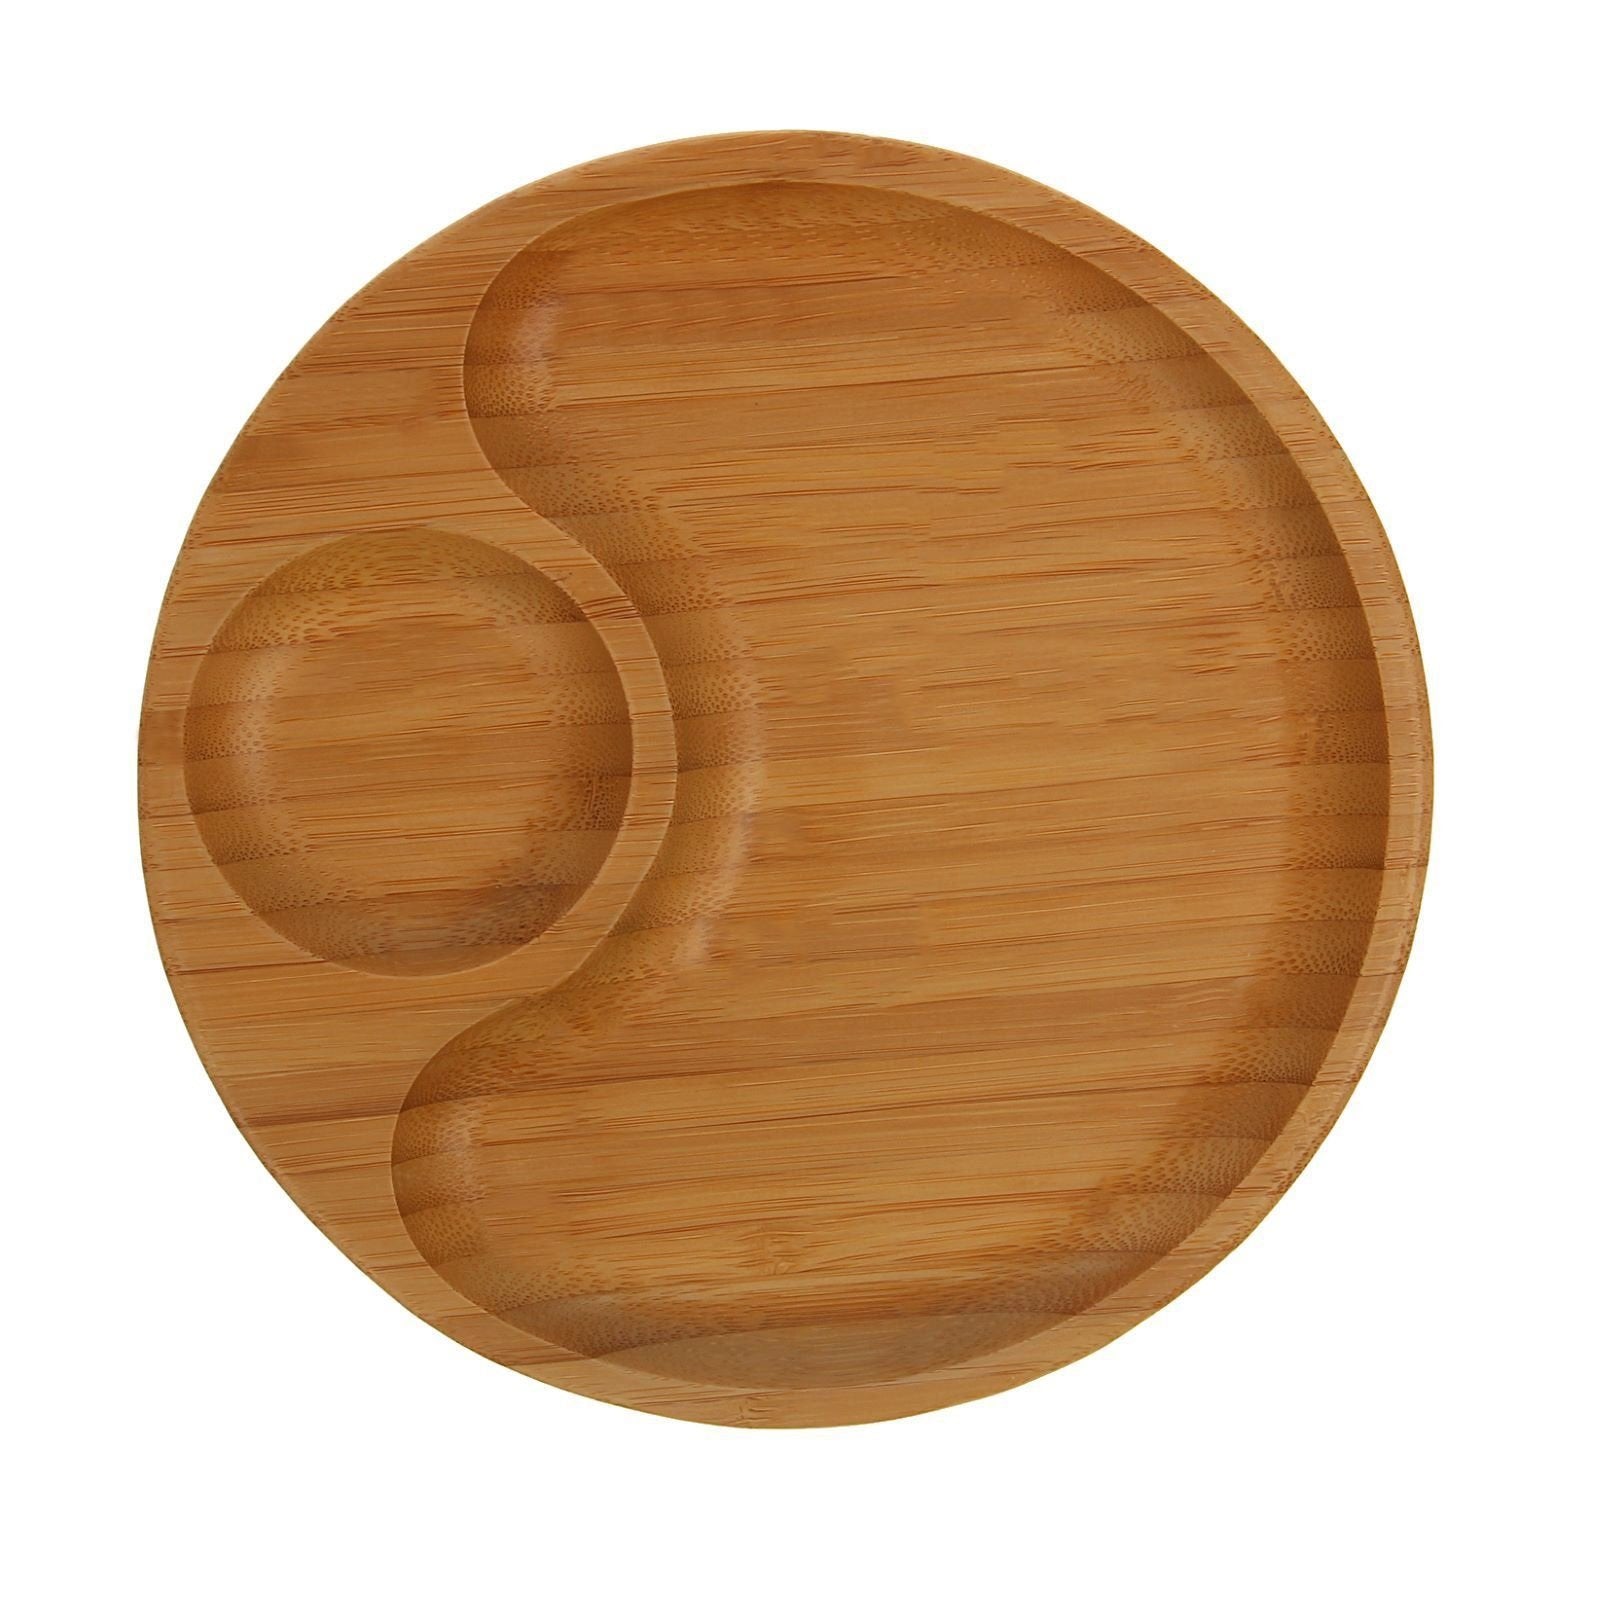 Set of 6 Natural Bamboo 2 Section Platters 8"